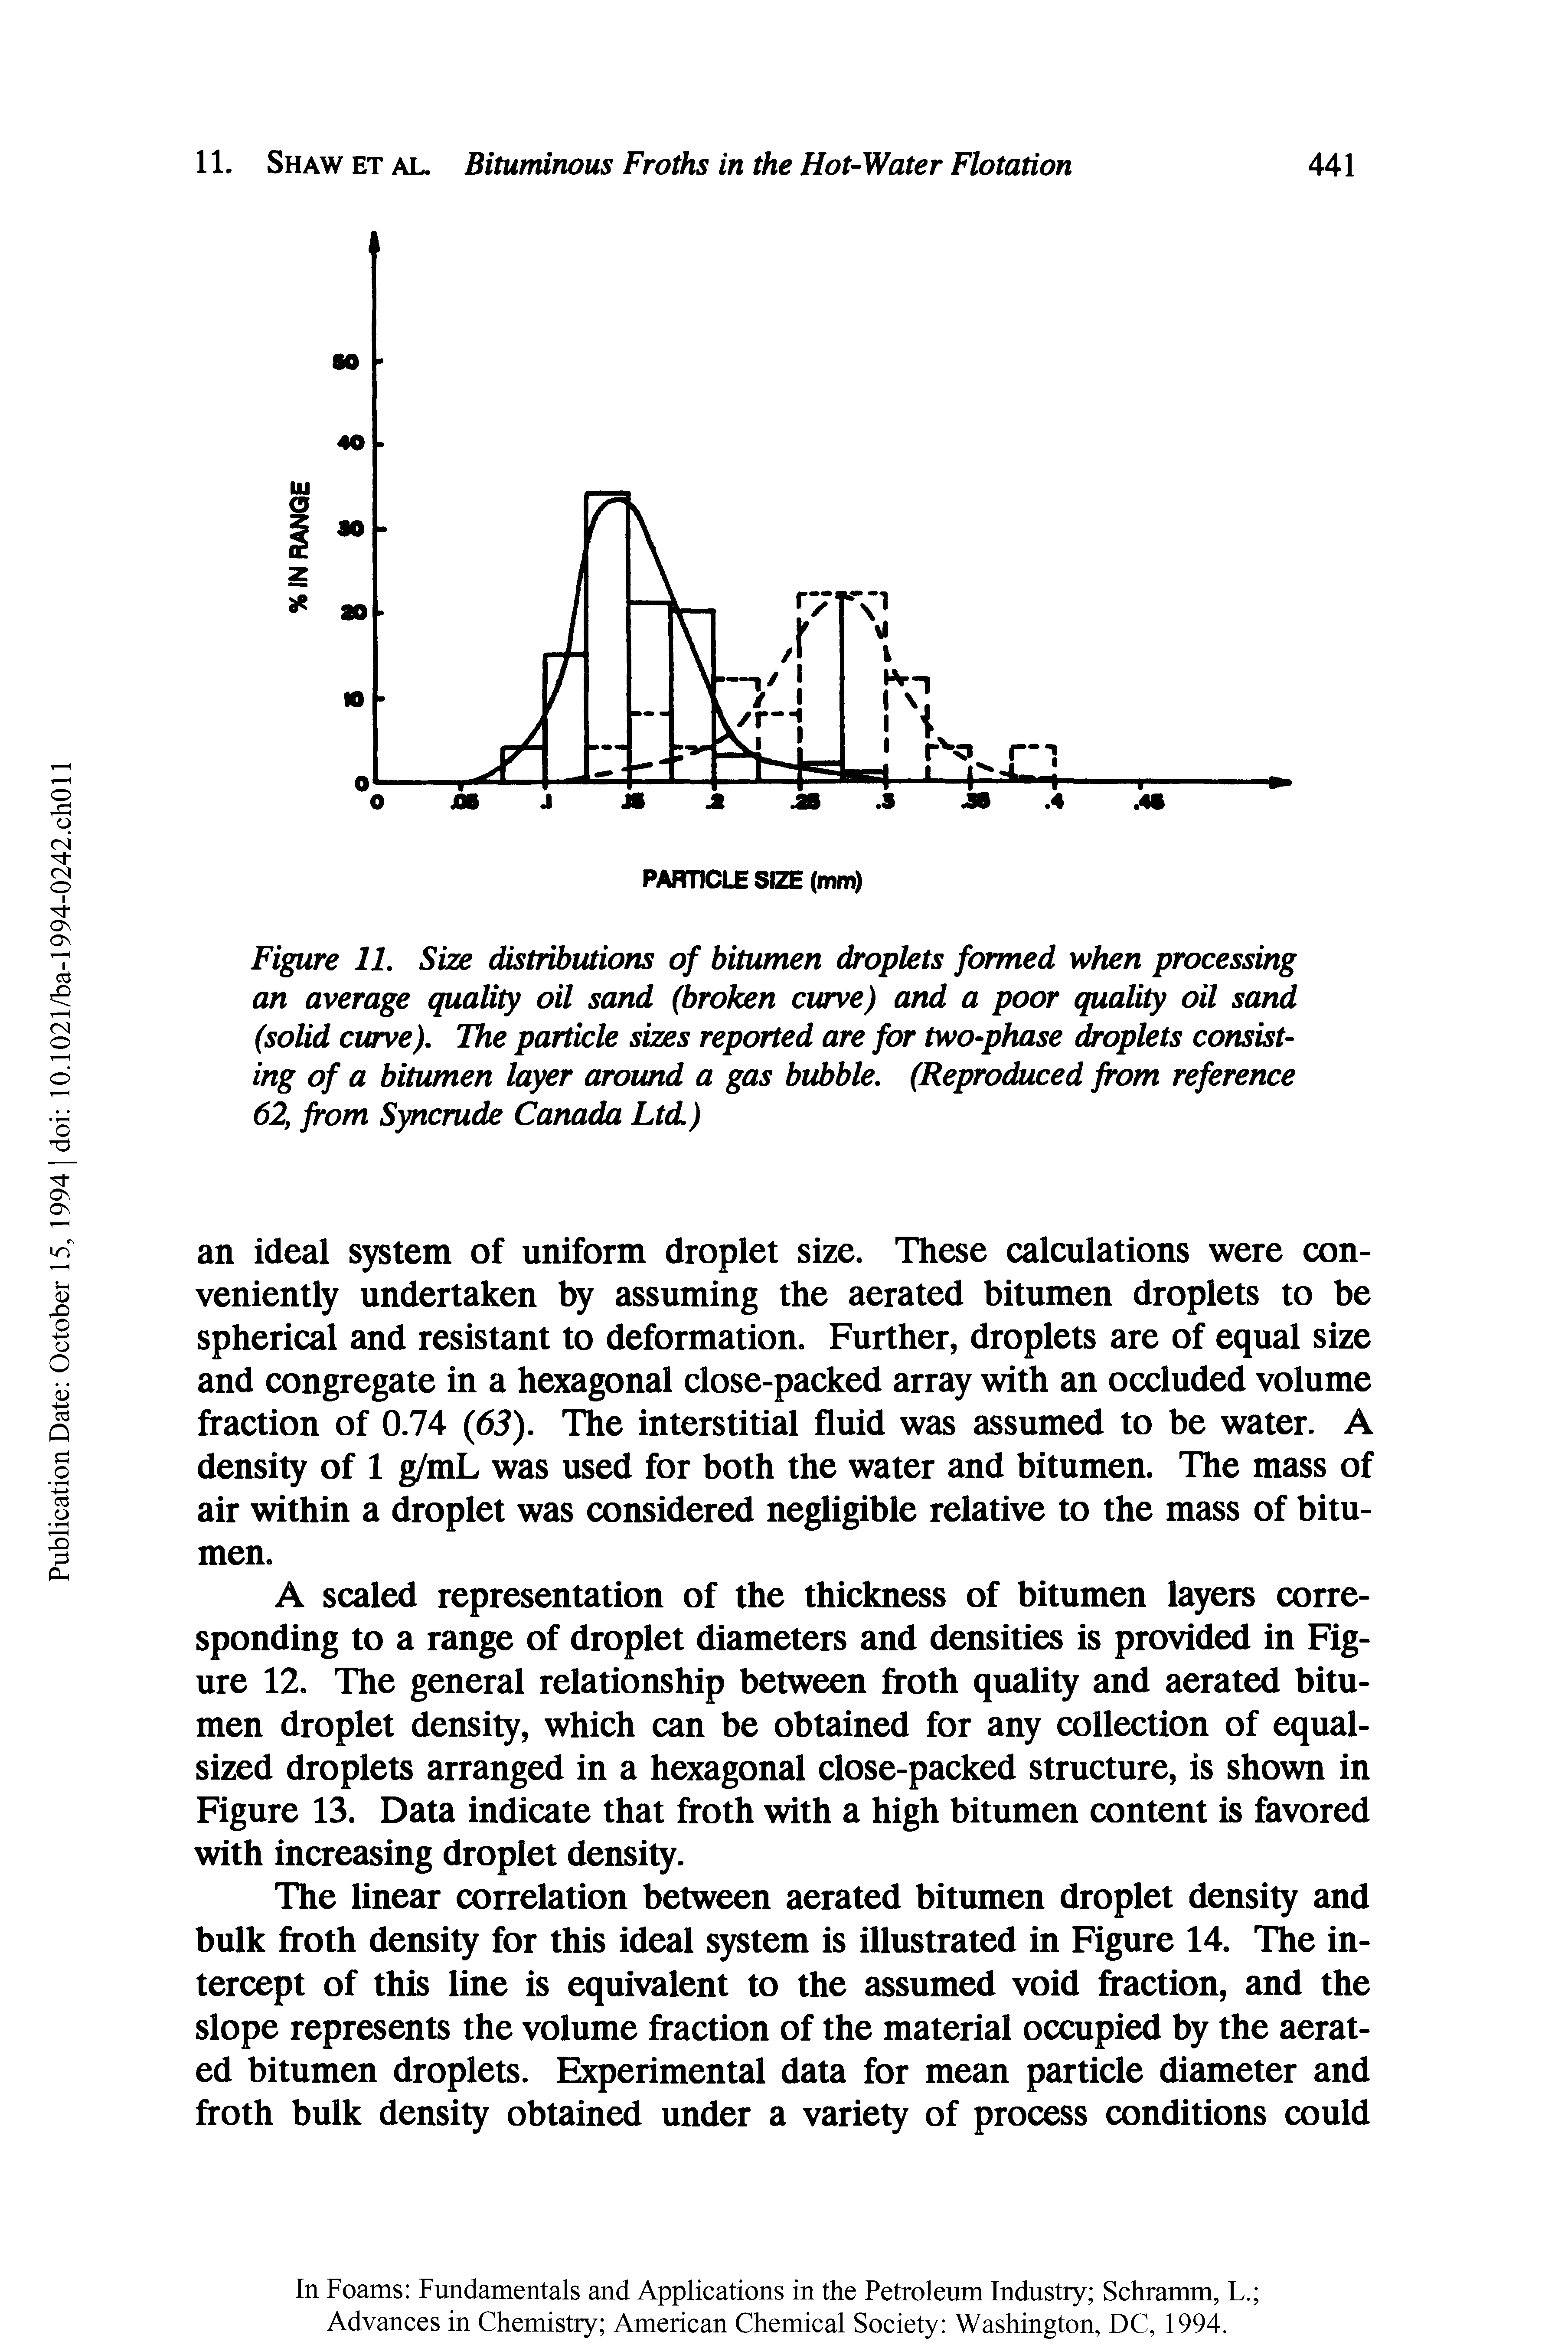 Figure 11. Size distributions of bitumen droplets formed when processing an average quality oil sand (broken curve) and a poor quality oil sand (solid curve). The particle sizes reported are for two-phase droplets consisting of a bitumen layer around a gas bubble. (Reproduced from reference 62, from Syncrude Canada Ltd.)...